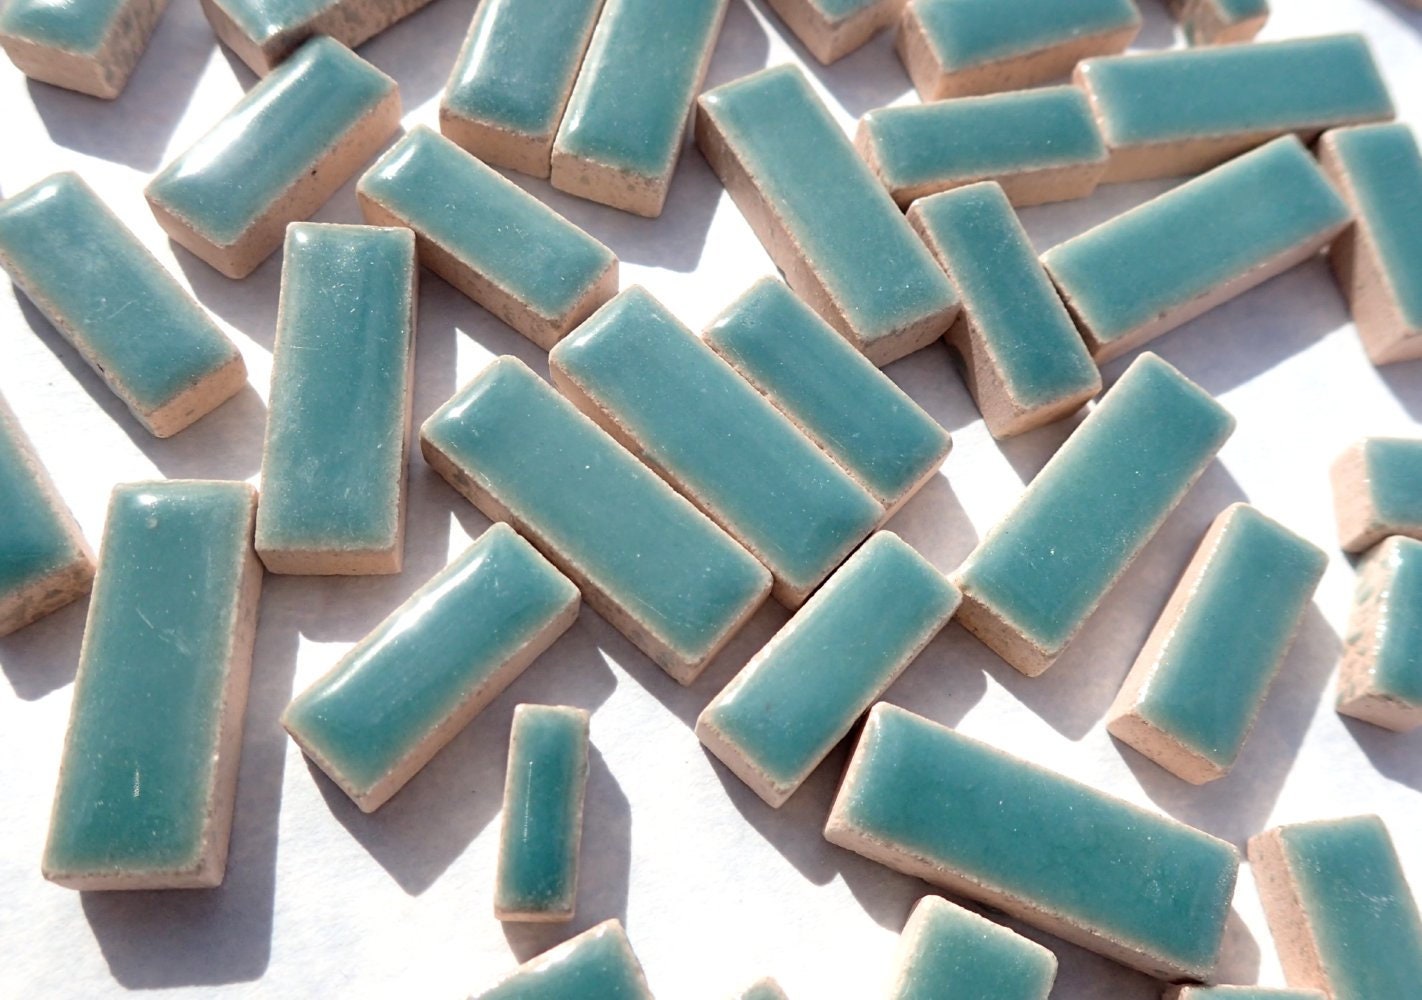 Deep Sea Green Mini Rectangles Mosaic Tiles - 50g Ceramic in Mix of 3 Sizes 1/2" and 3/4" in Phthalo Green